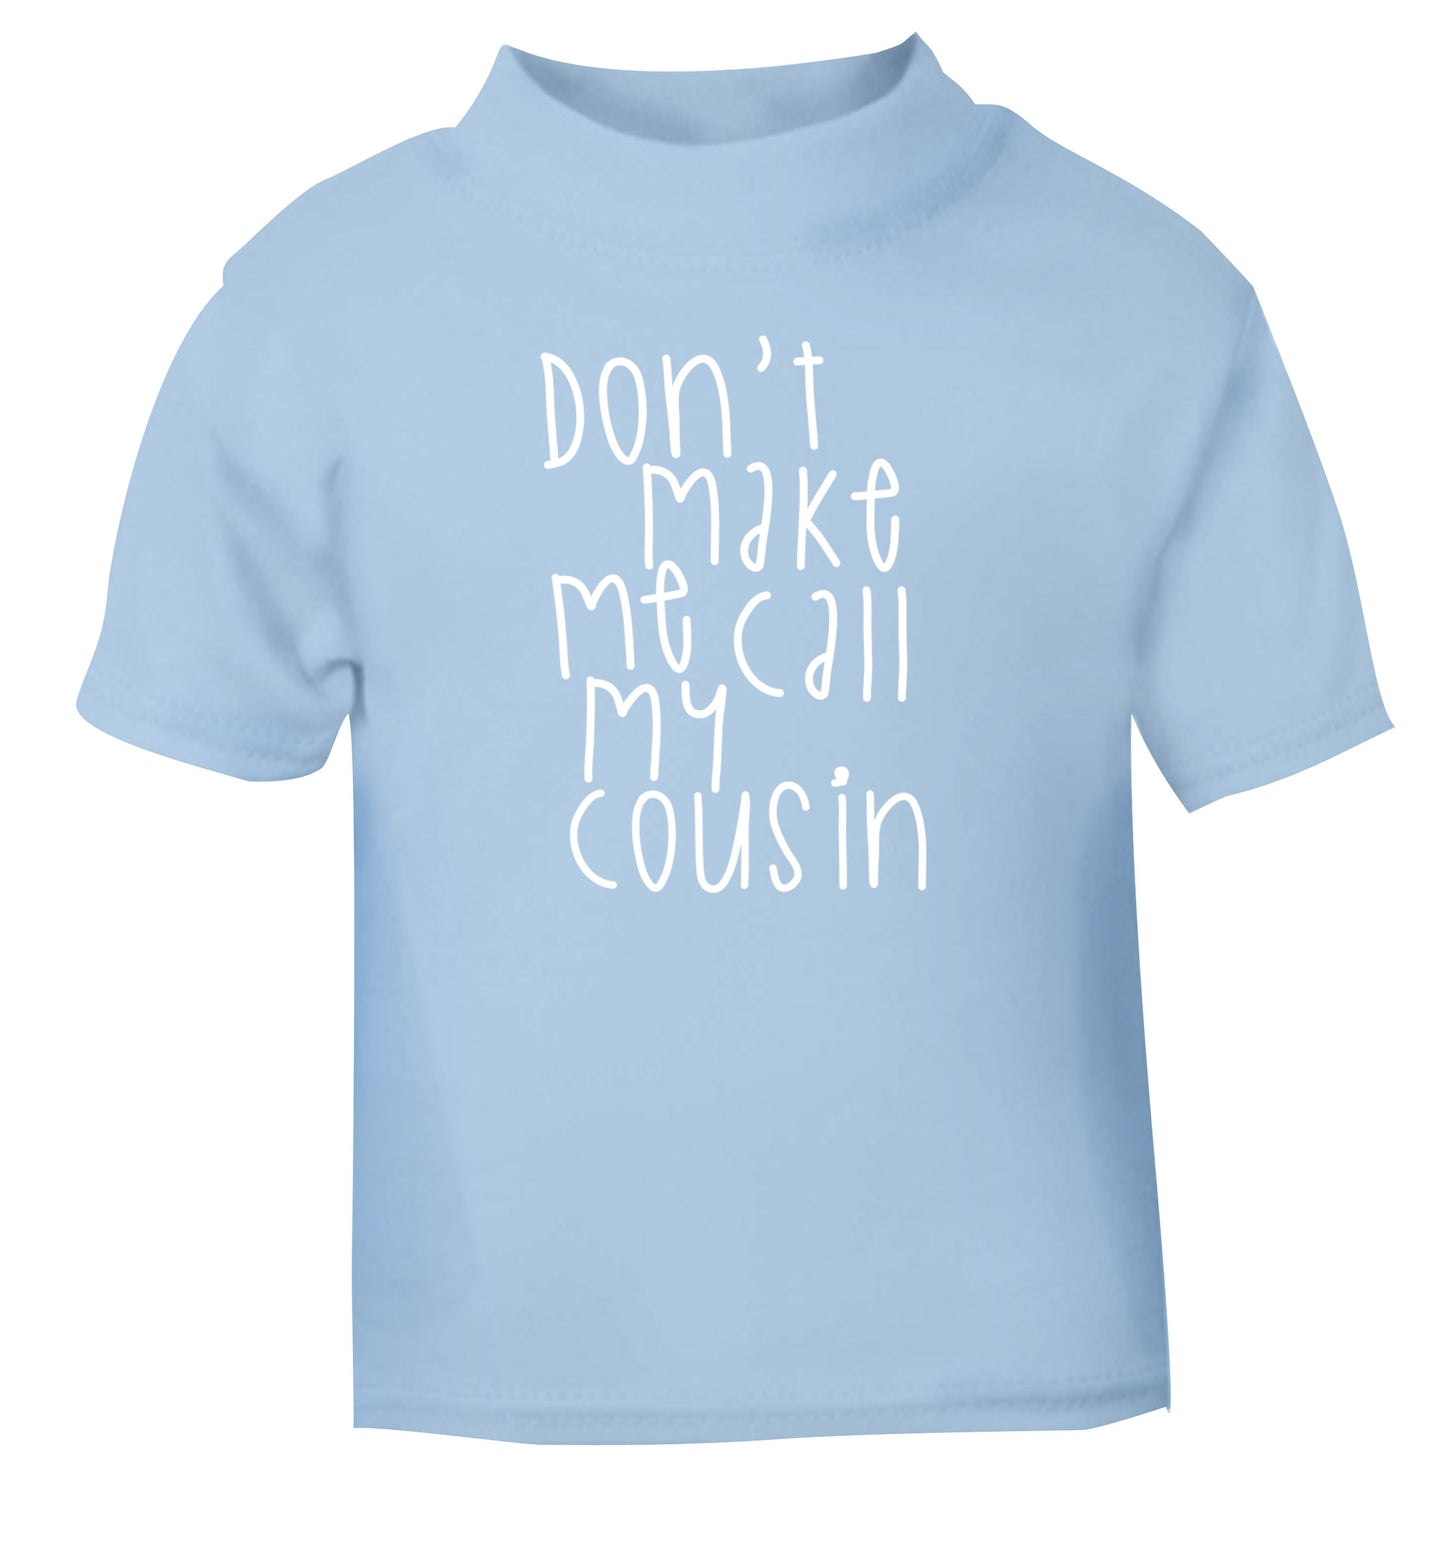 Don't make me call my cousin light blue Baby Toddler Tshirt 2 Years